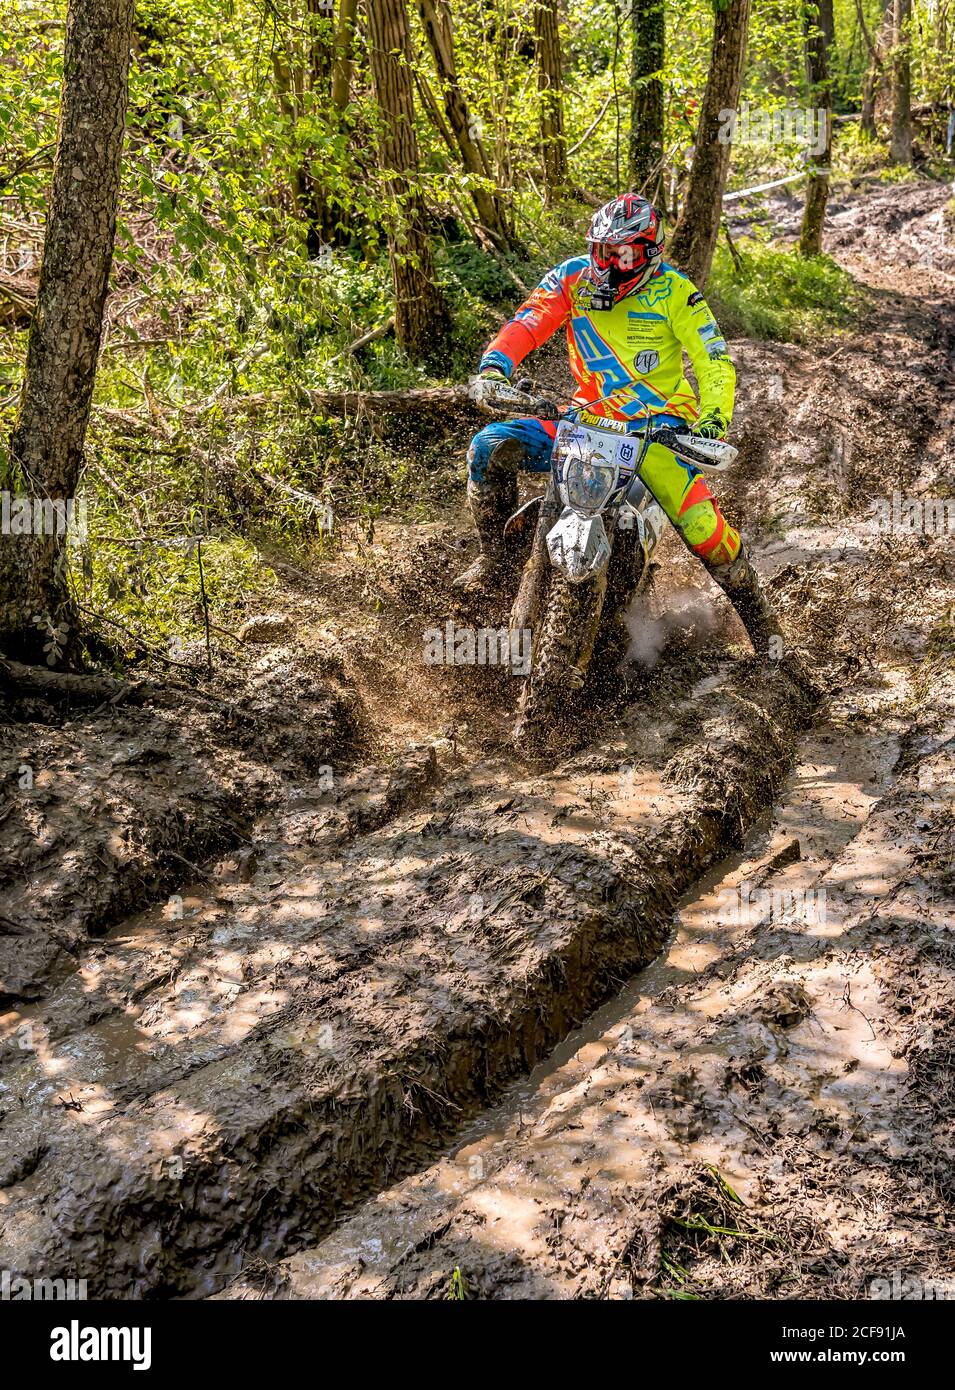 Biandronno, Lombardy, Italy - April 22, 2018: Motocross rider splashing mud on wet and muddy terrain. Open competitions in motocross. Stock Photo